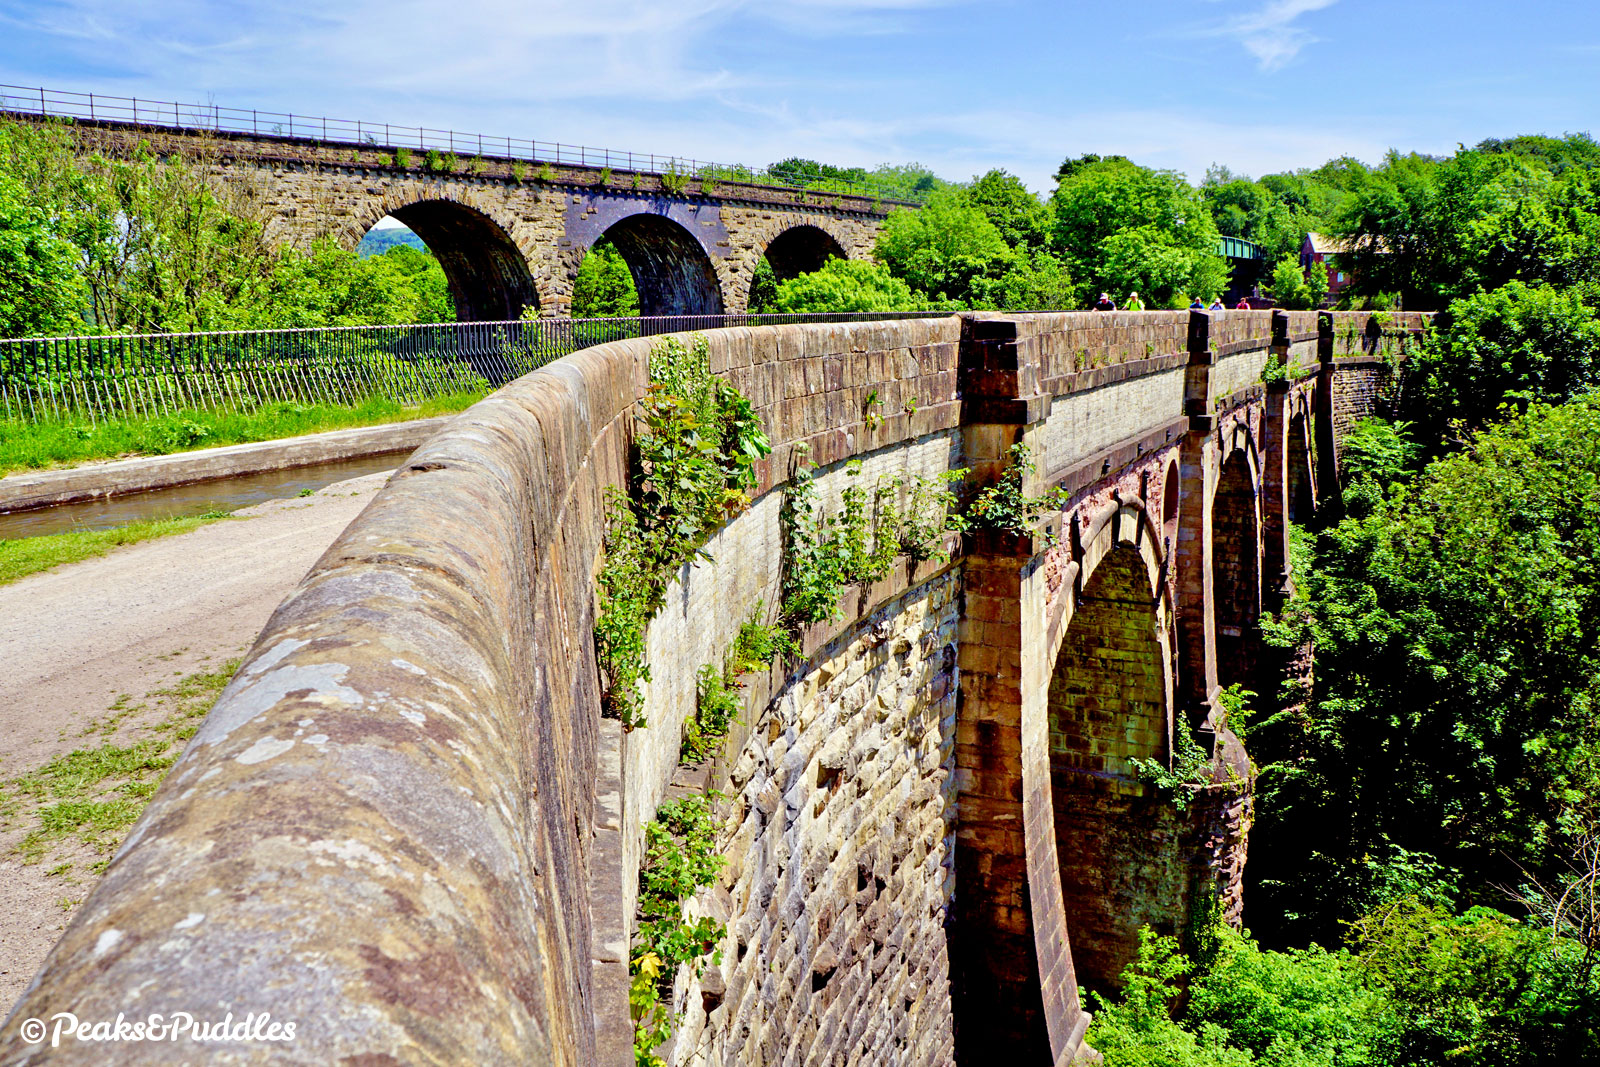 Despite its hefty stone structure, the 200 year old Marple Aqueduct manages to have a wonderful touch of graceful whimsy in the way it crosses the River Goyt.